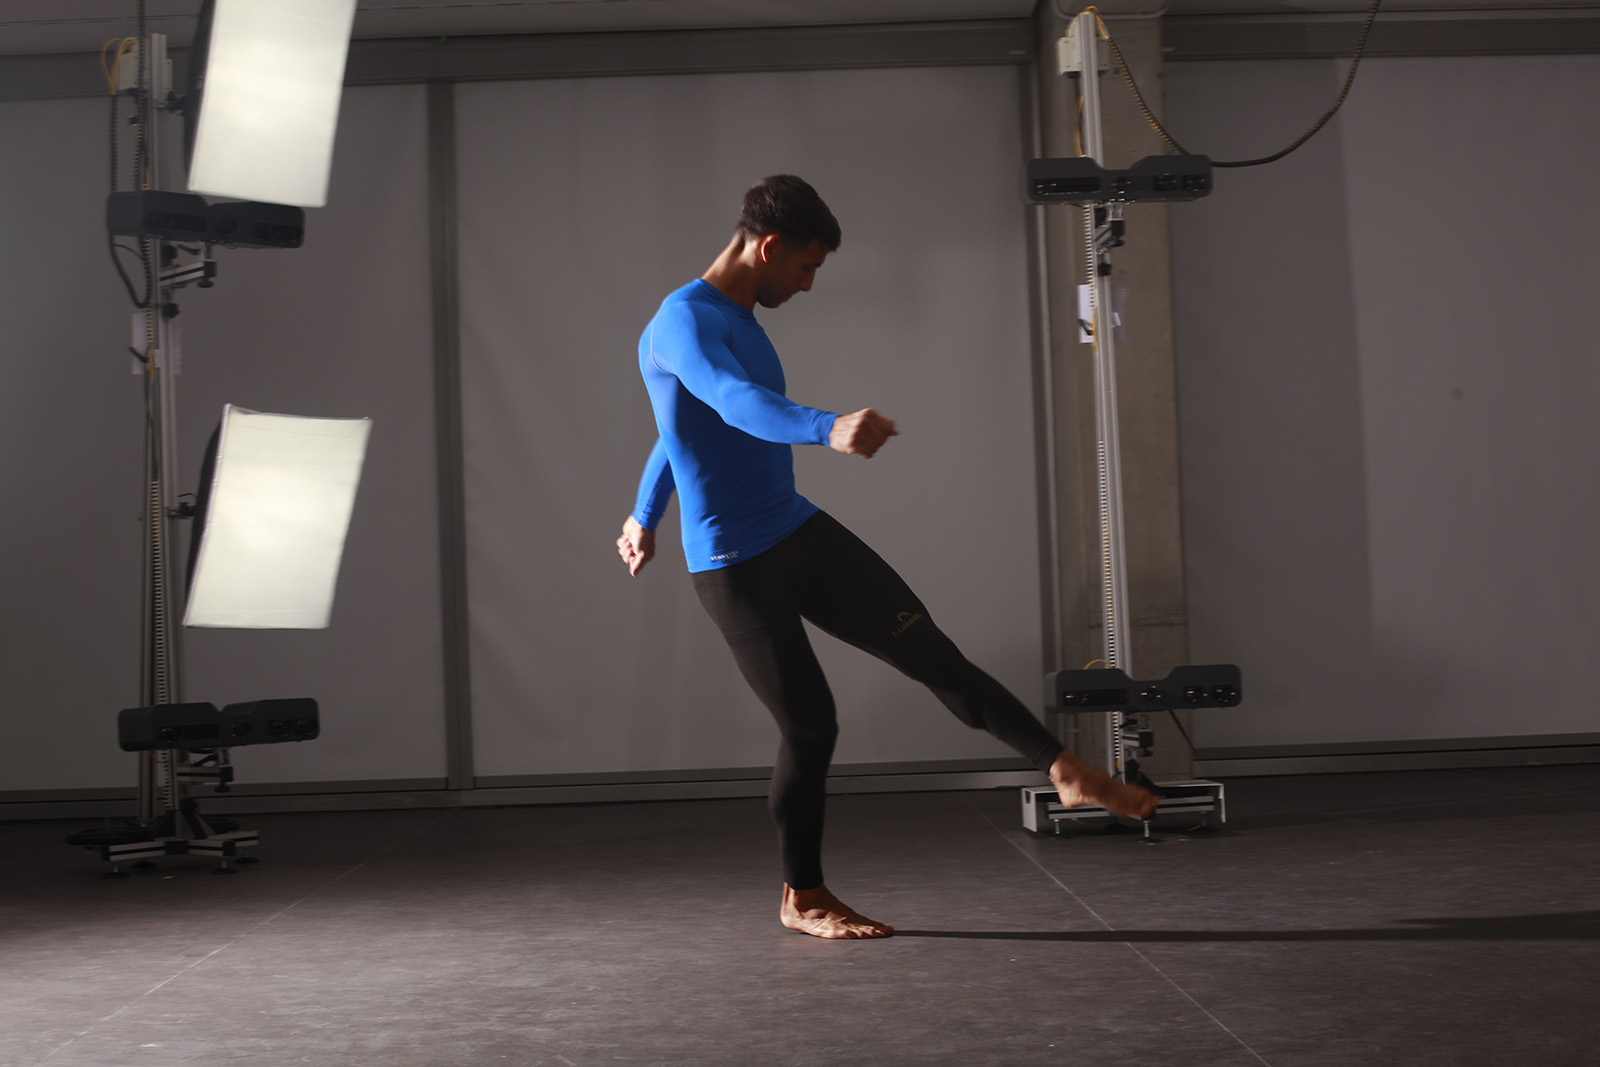 A sportman kicking in the studio for a Move 4D scan